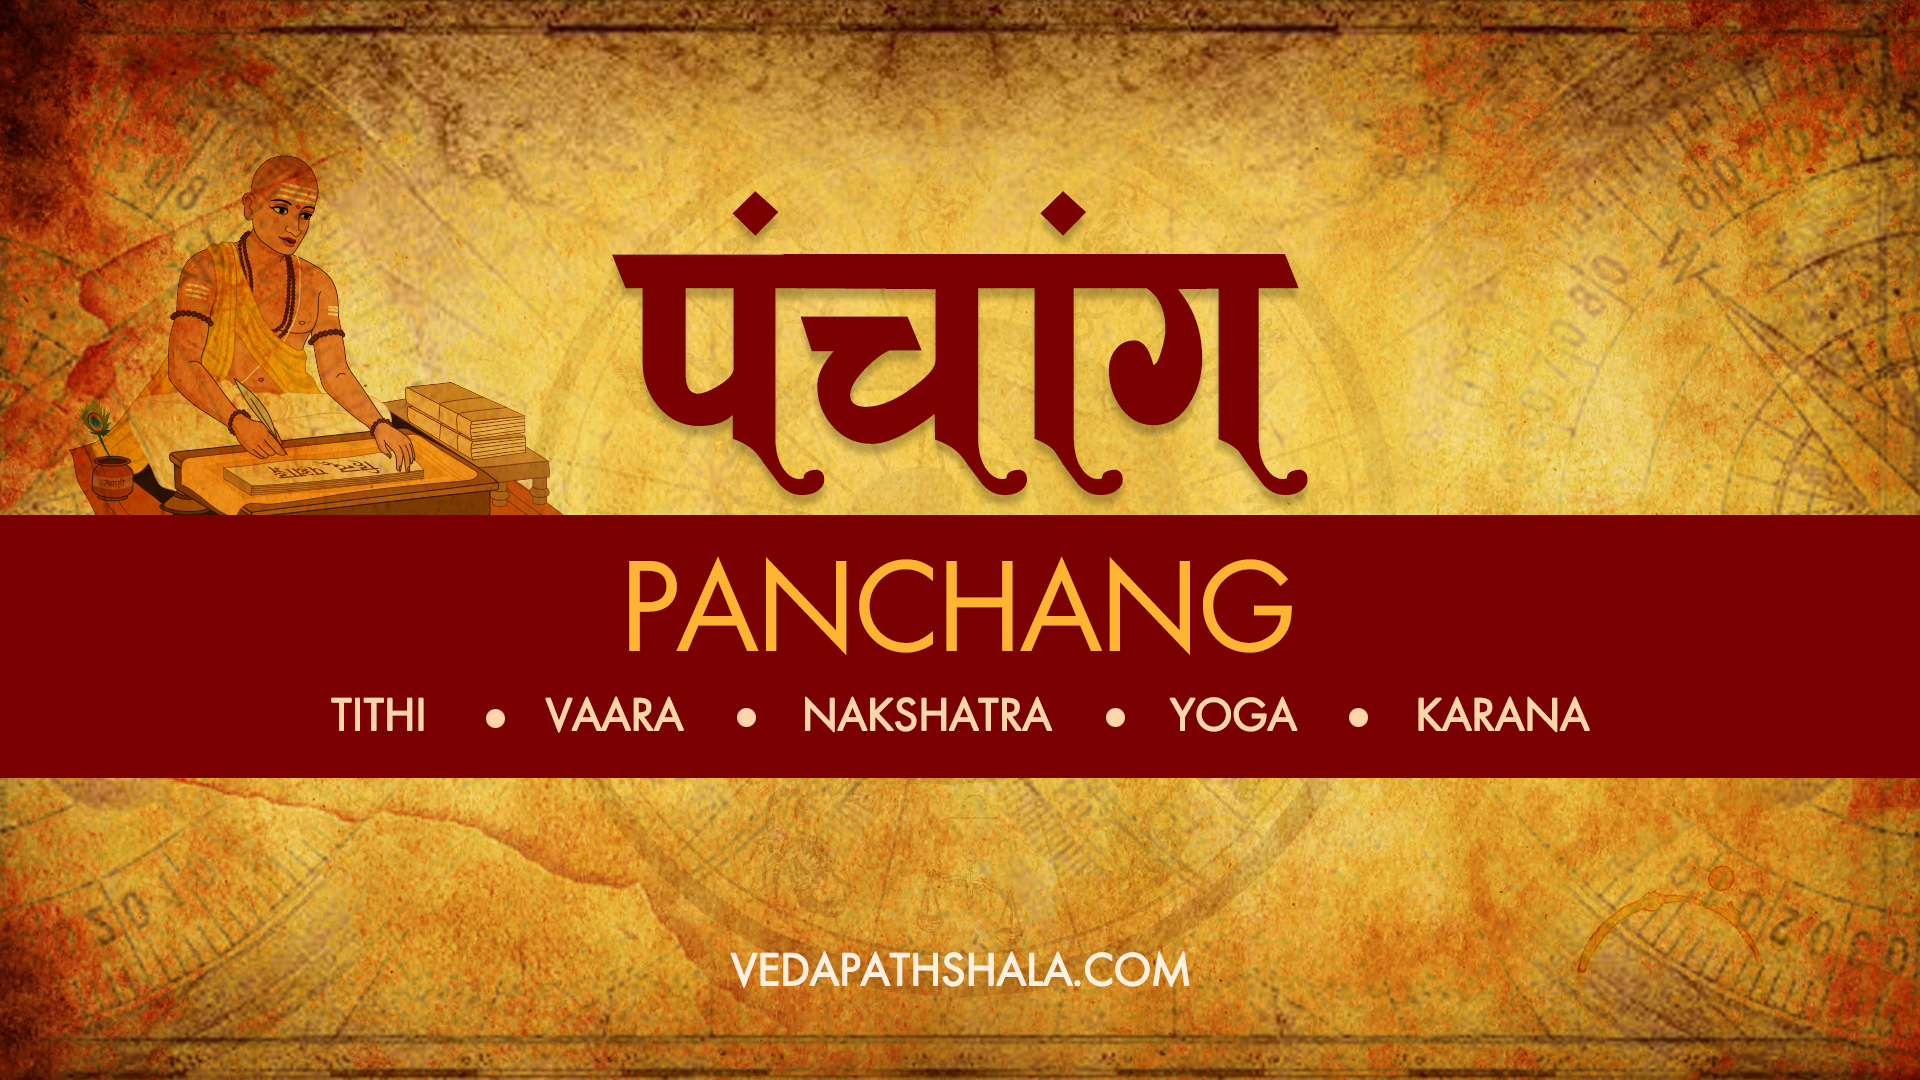 What is Panchang or Panchangam - School of wisdom and knowledge